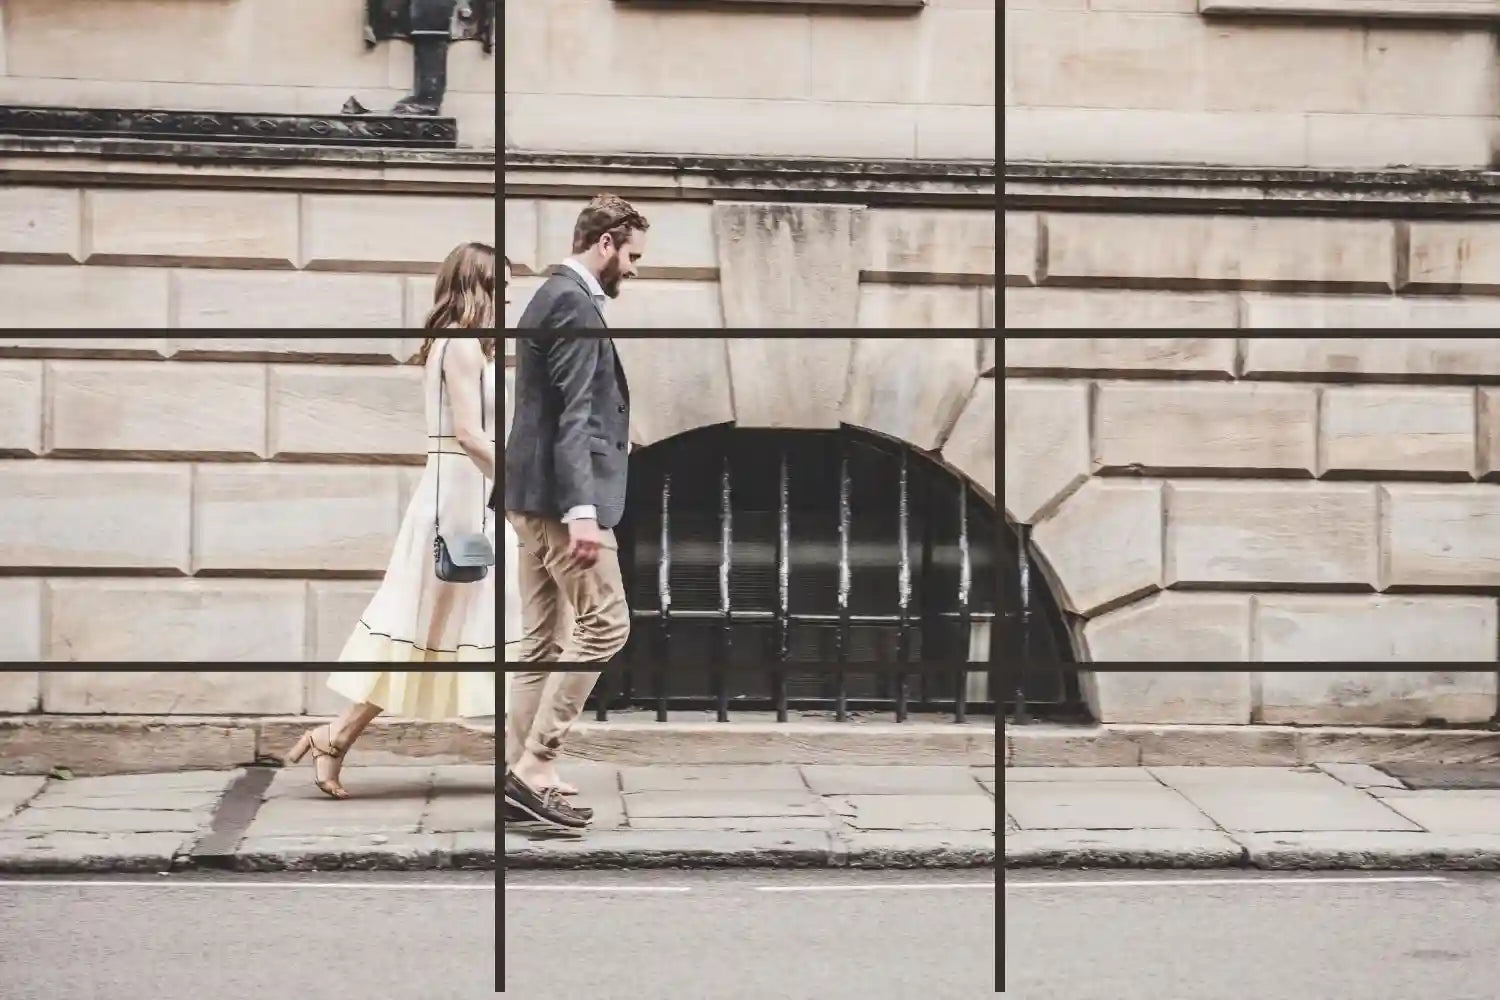 A man and a woman walking hand in hand on the street